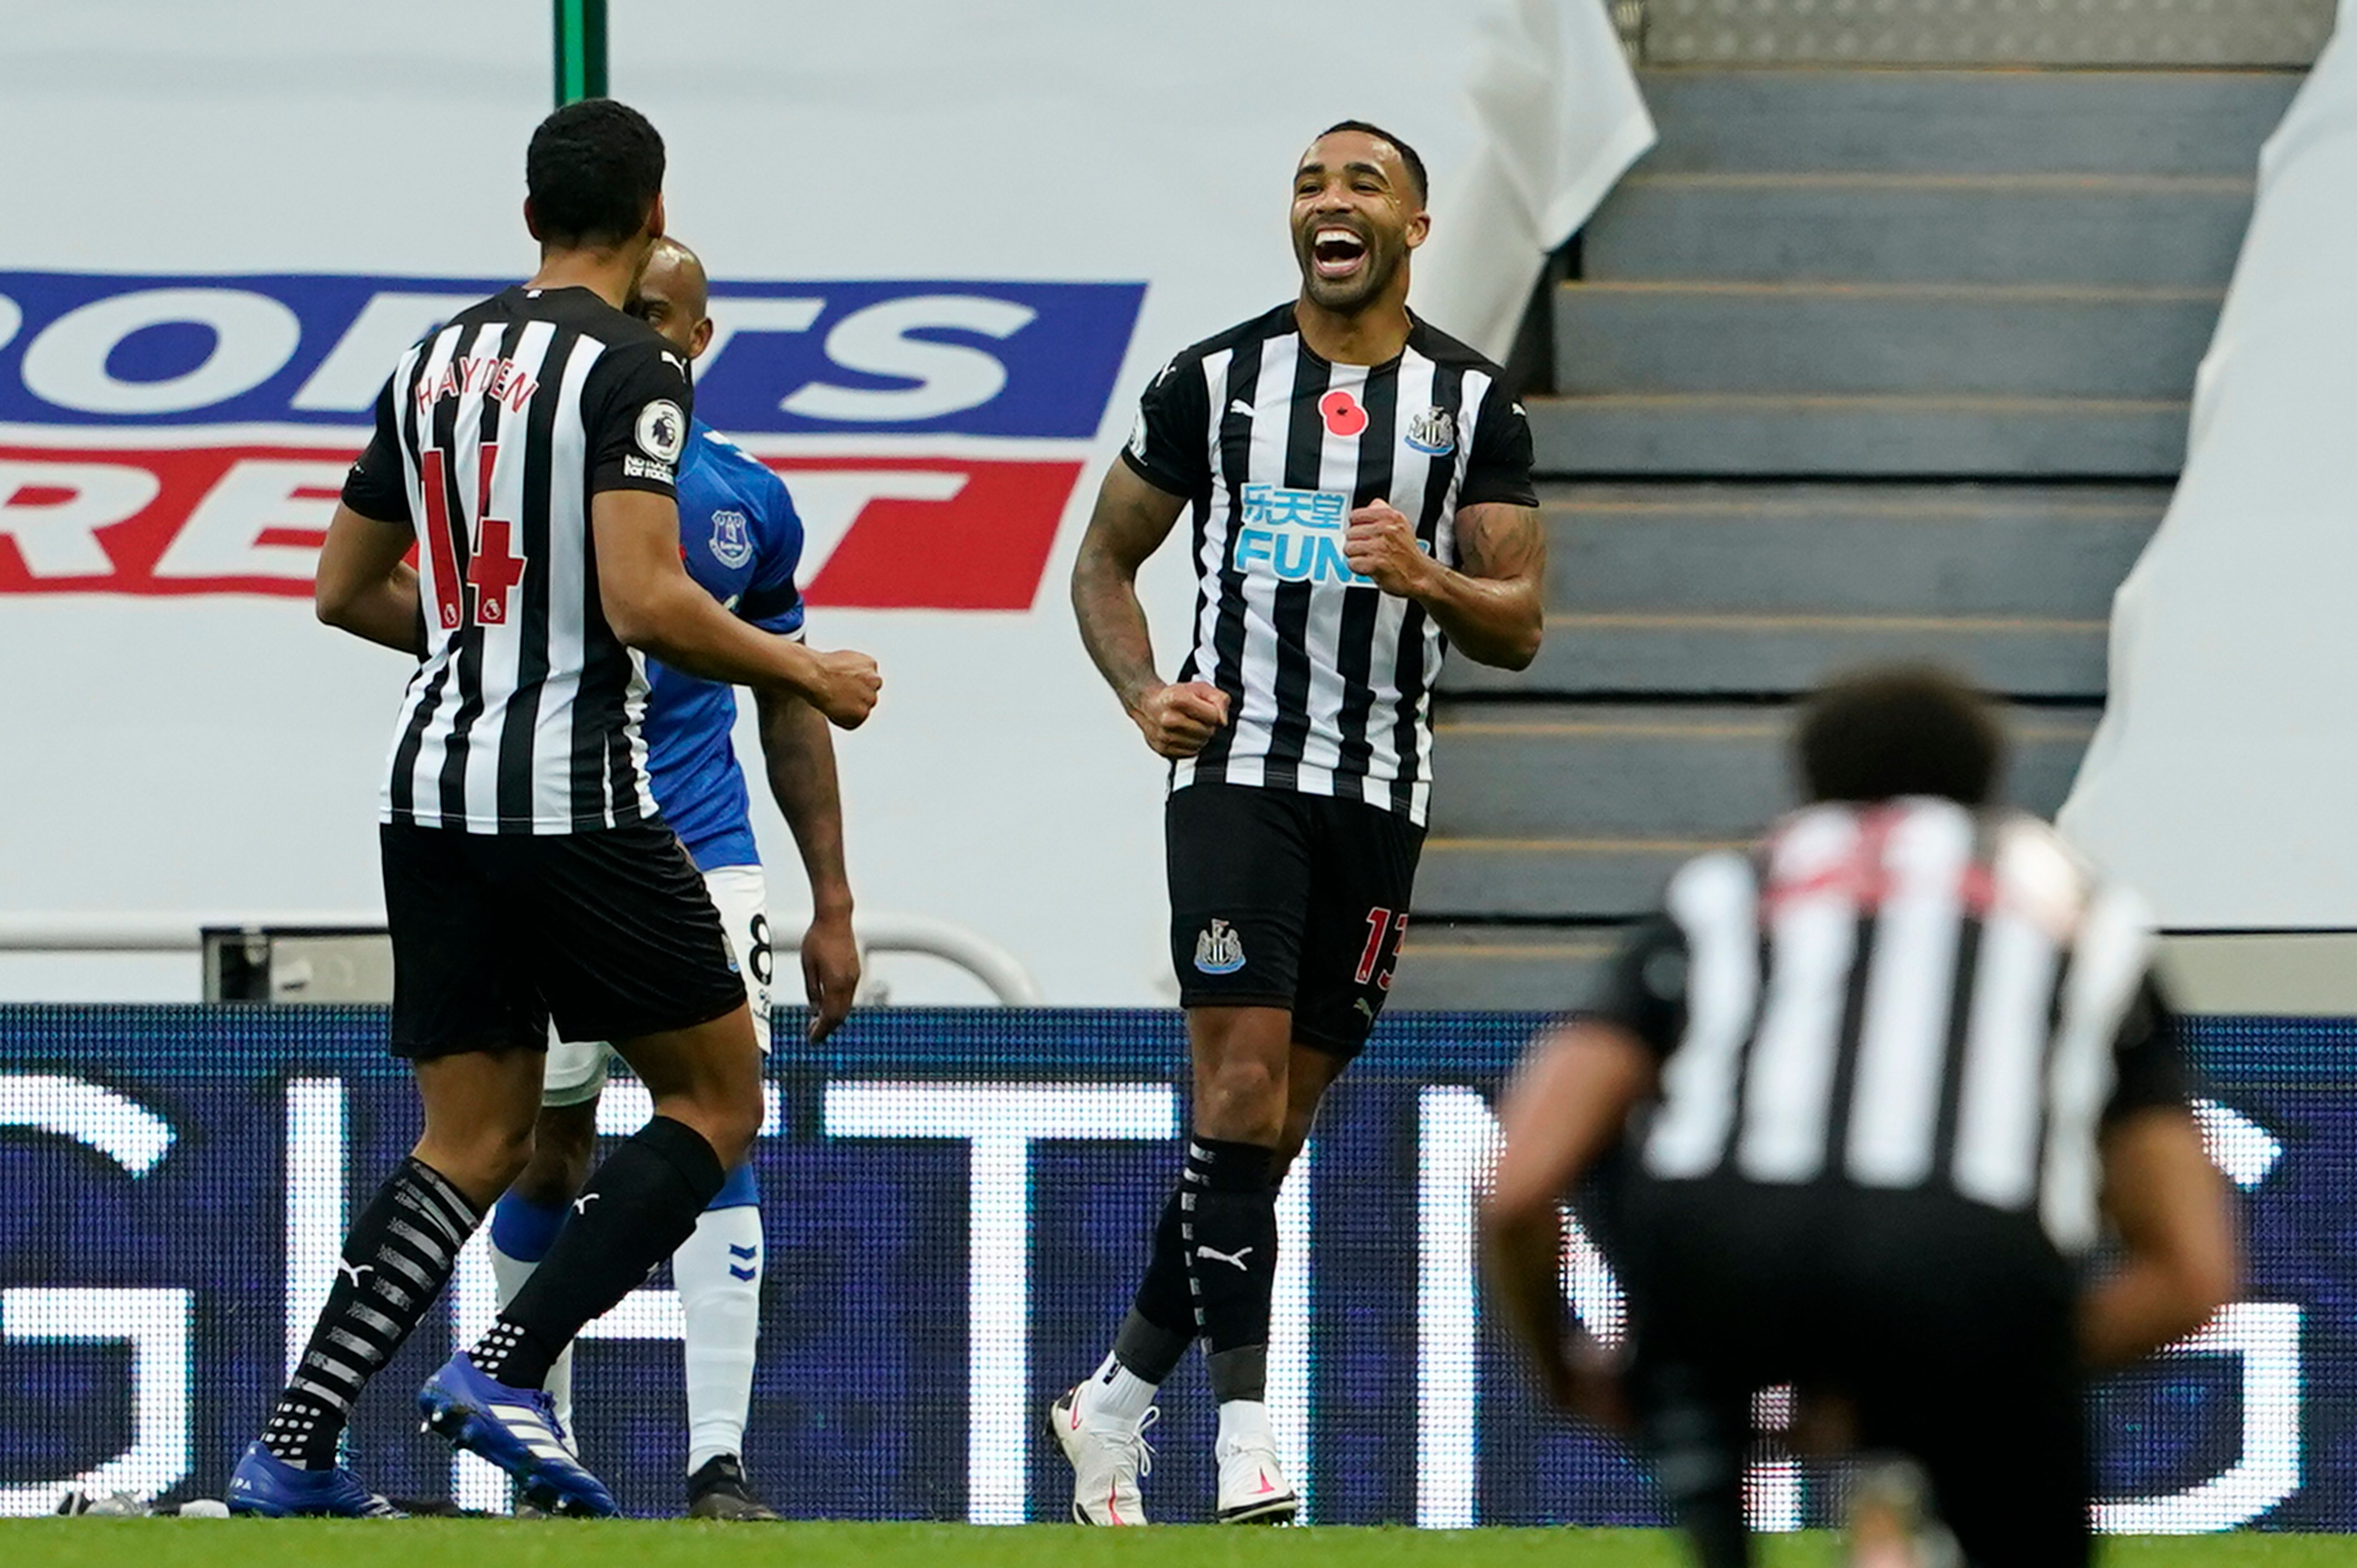 Newcastle United players rated in impressive win vs Everton - The 4th